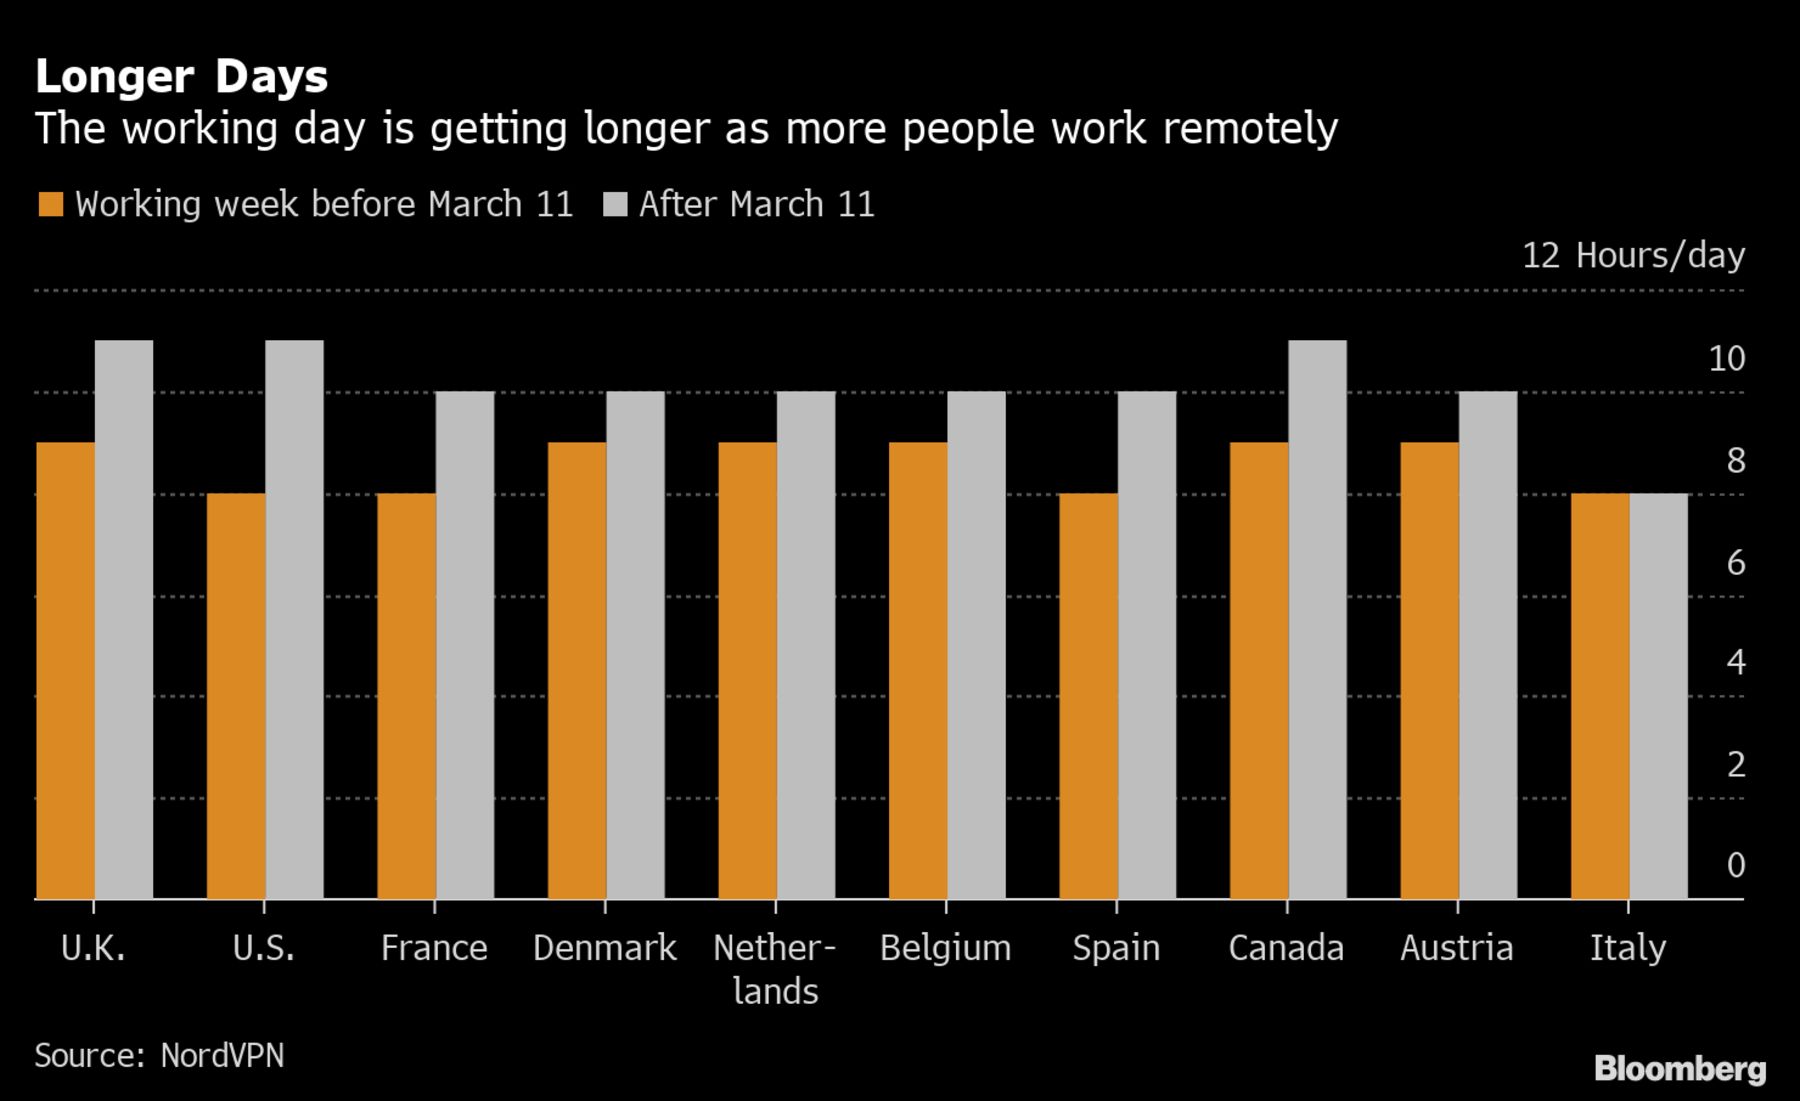 Average remote workday before and after March 11, by Country